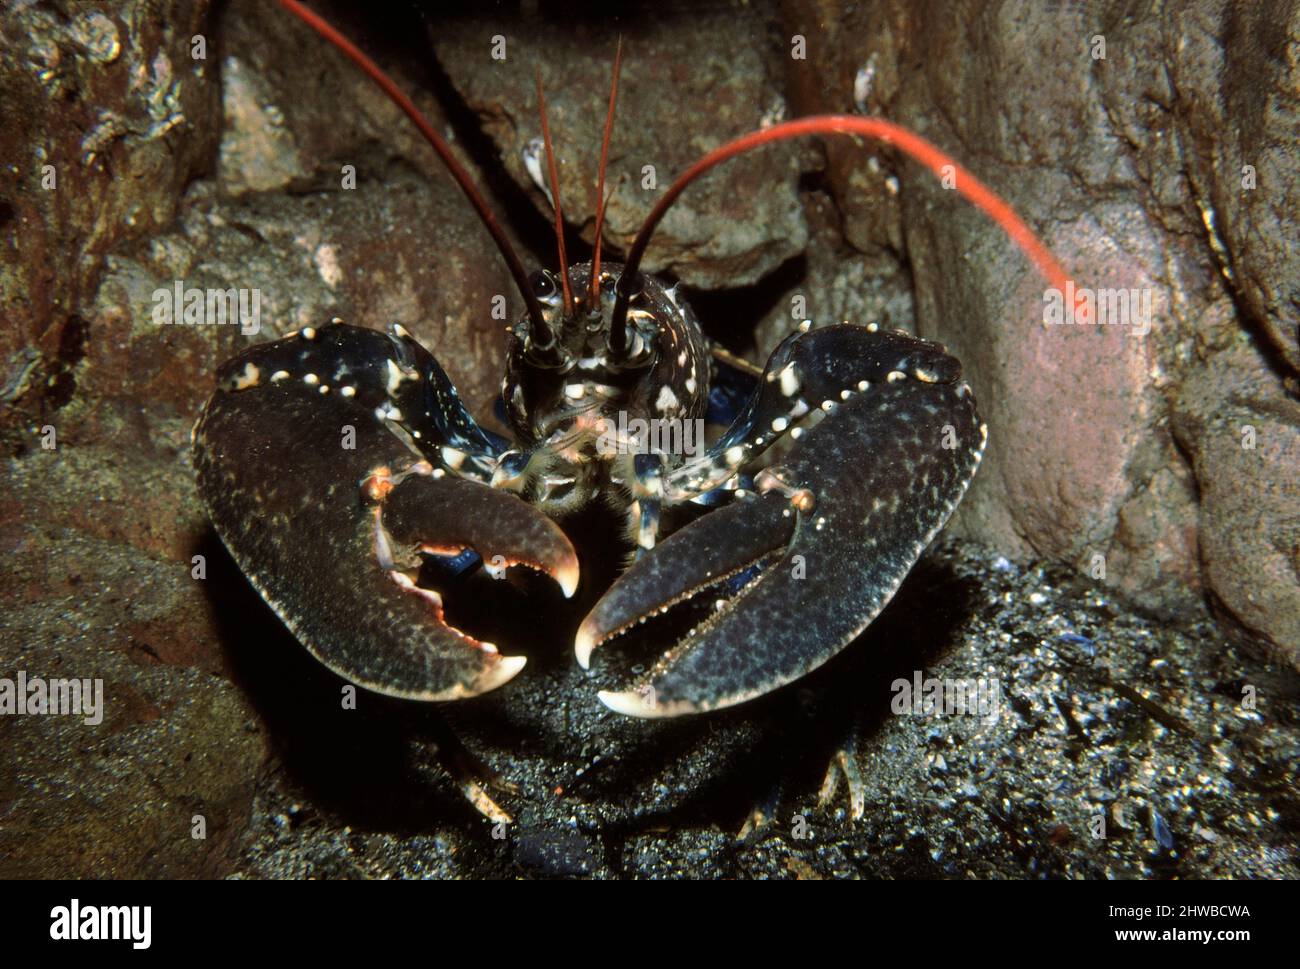 Common lobster (Homarus gammarus) at the entrance to its hole in the rock home, UK. Stock Photo